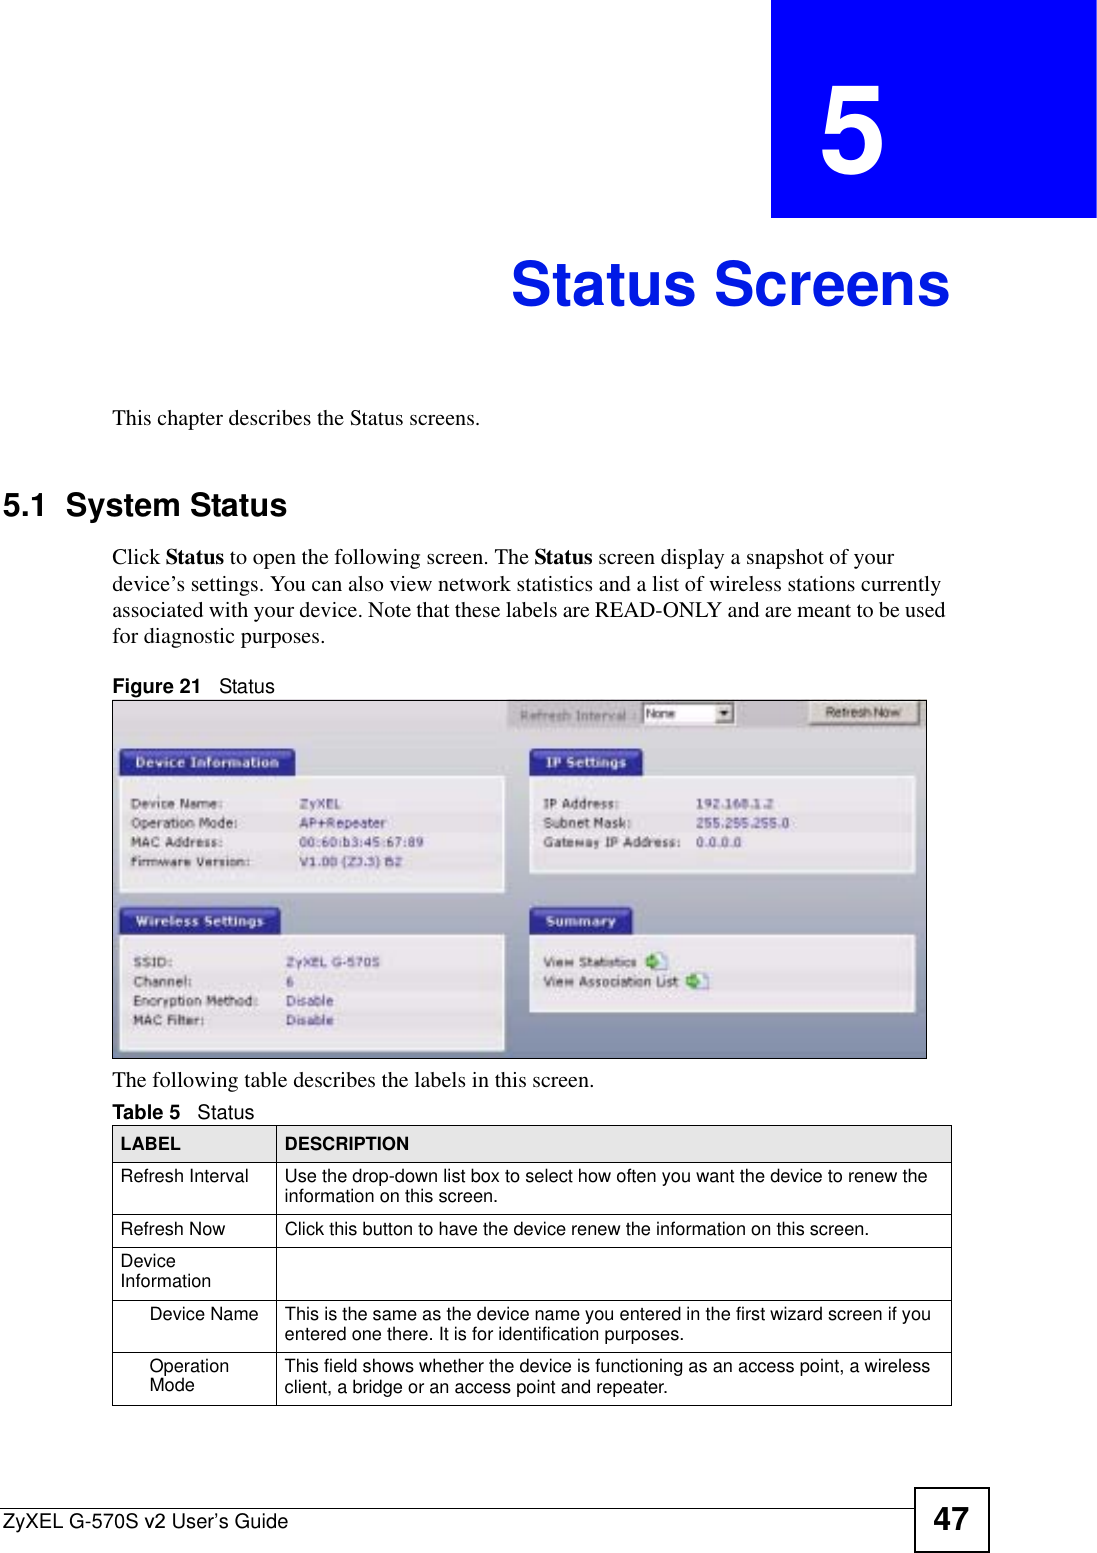 ZyXEL G-570S v2 User’s Guide 47CHAPTER  5 Status ScreensThis chapter describes the Status screens.5.1  System Status Click Status to open the following screen. The Status screen display a snapshot of your device’s settings. You can also view network statistics and a list of wireless stations currently associated with your device. Note that these labels are READ-ONLY and are meant to be used for diagnostic purposes.Figure 21   StatusThe following table describes the labels in this screen.     Table 5   StatusLABEL DESCRIPTIONRefresh Interval Use the drop-down list box to select how often you want the device to renew the information on this screen.Refresh Now Click this button to have the device renew the information on this screen.DeviceInformationDevice Name This is the same as the device name you entered in the first wizard screen if you entered one there. It is for identification purposes.Operation Mode This field shows whether the device is functioning as an access point, a wireless client, a bridge or an access point and repeater.